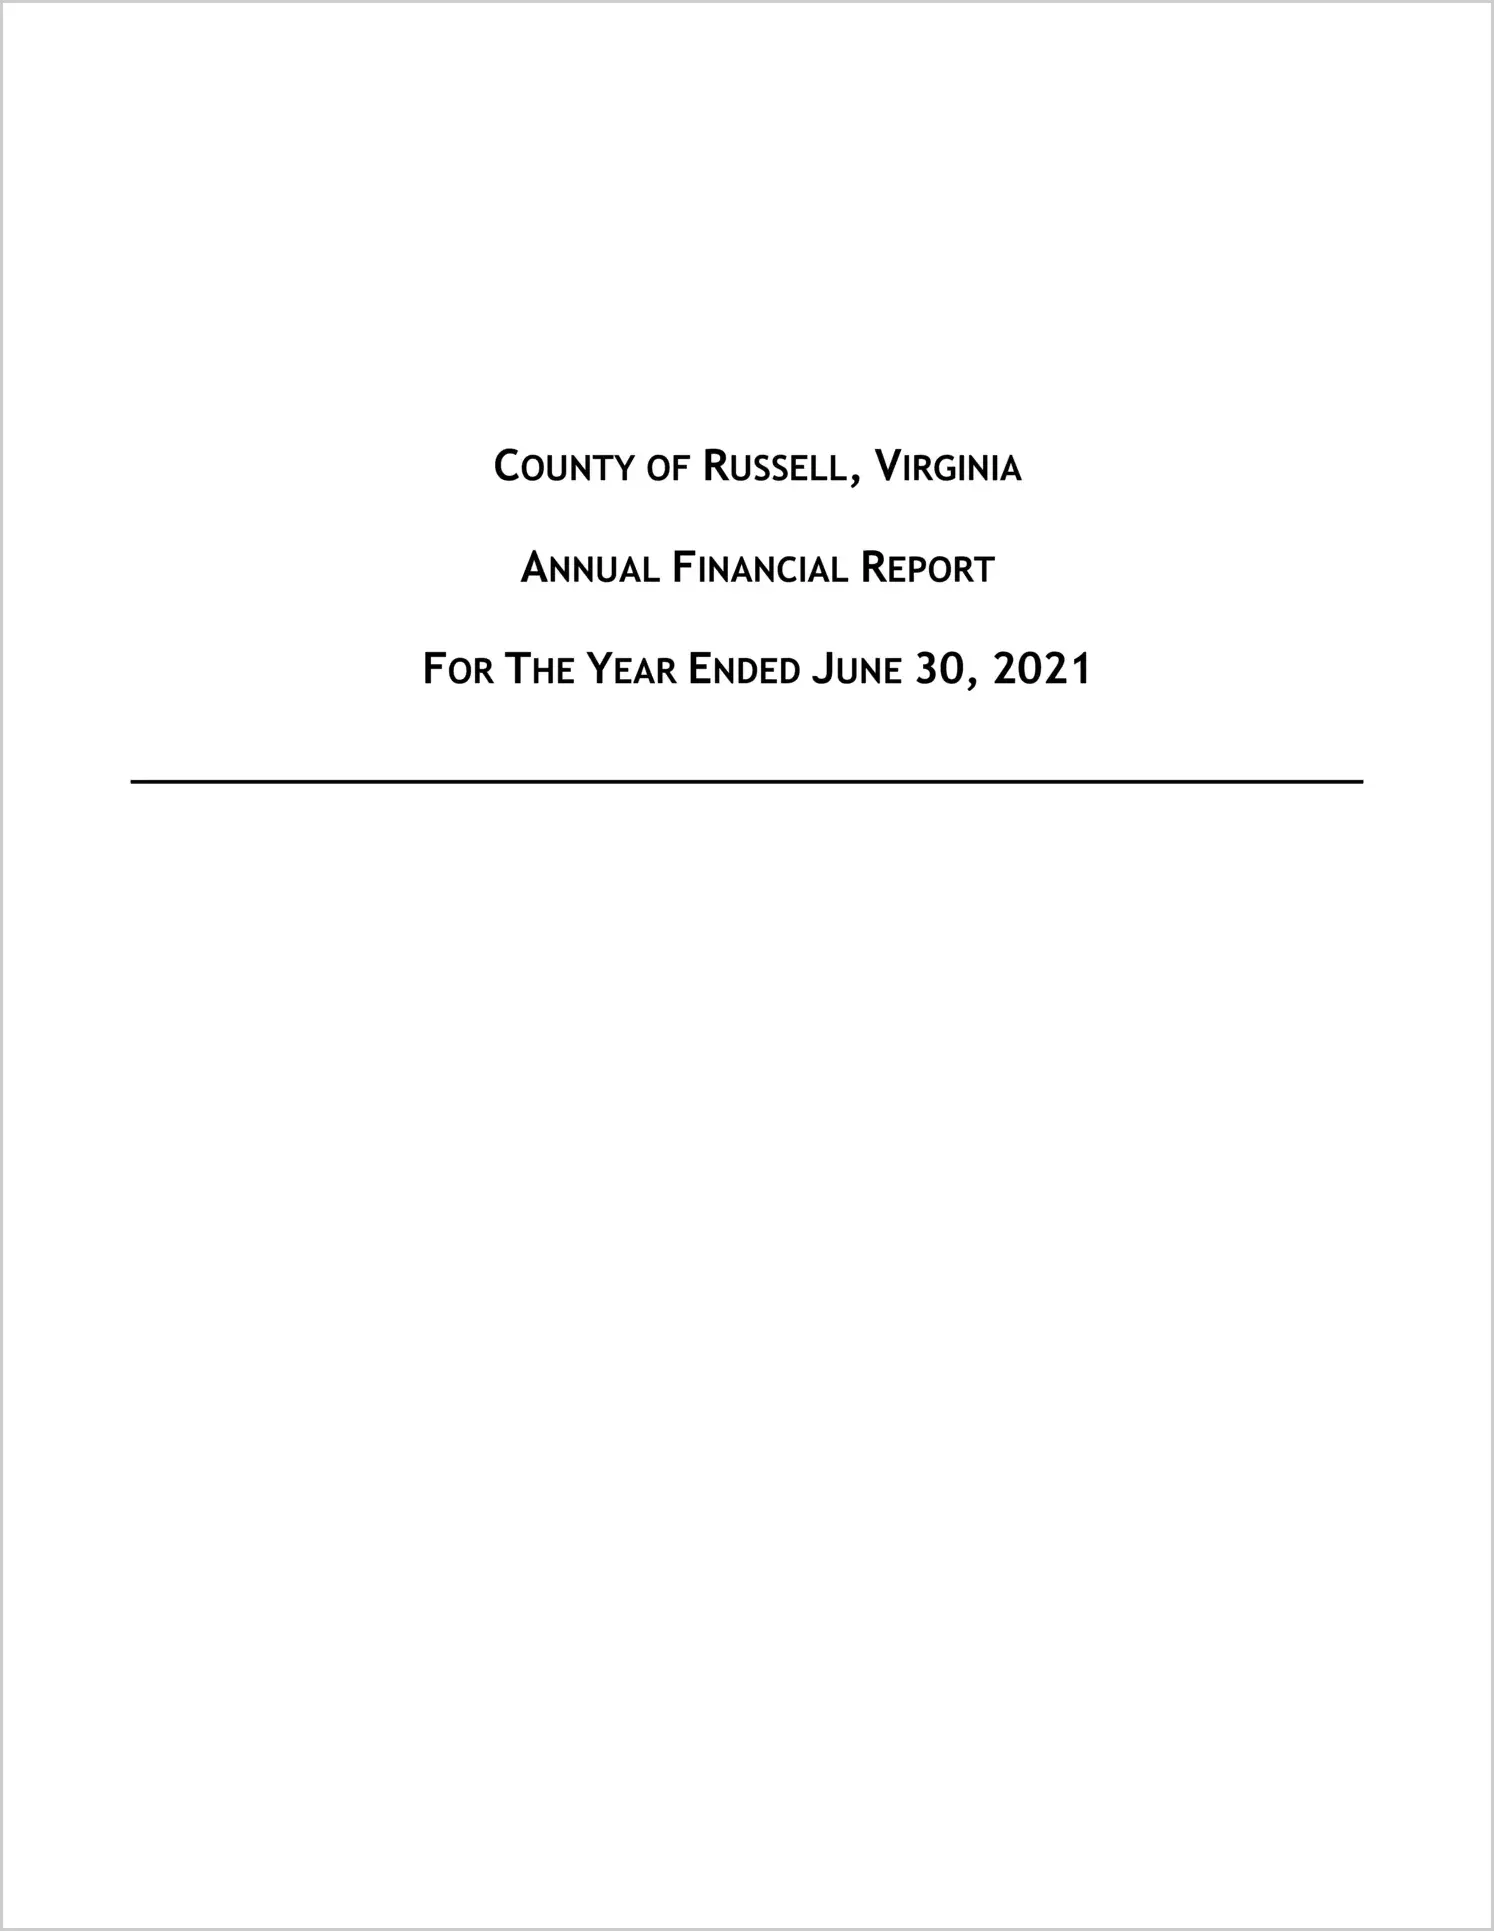 2021 Annual Financial Report for County of Russell